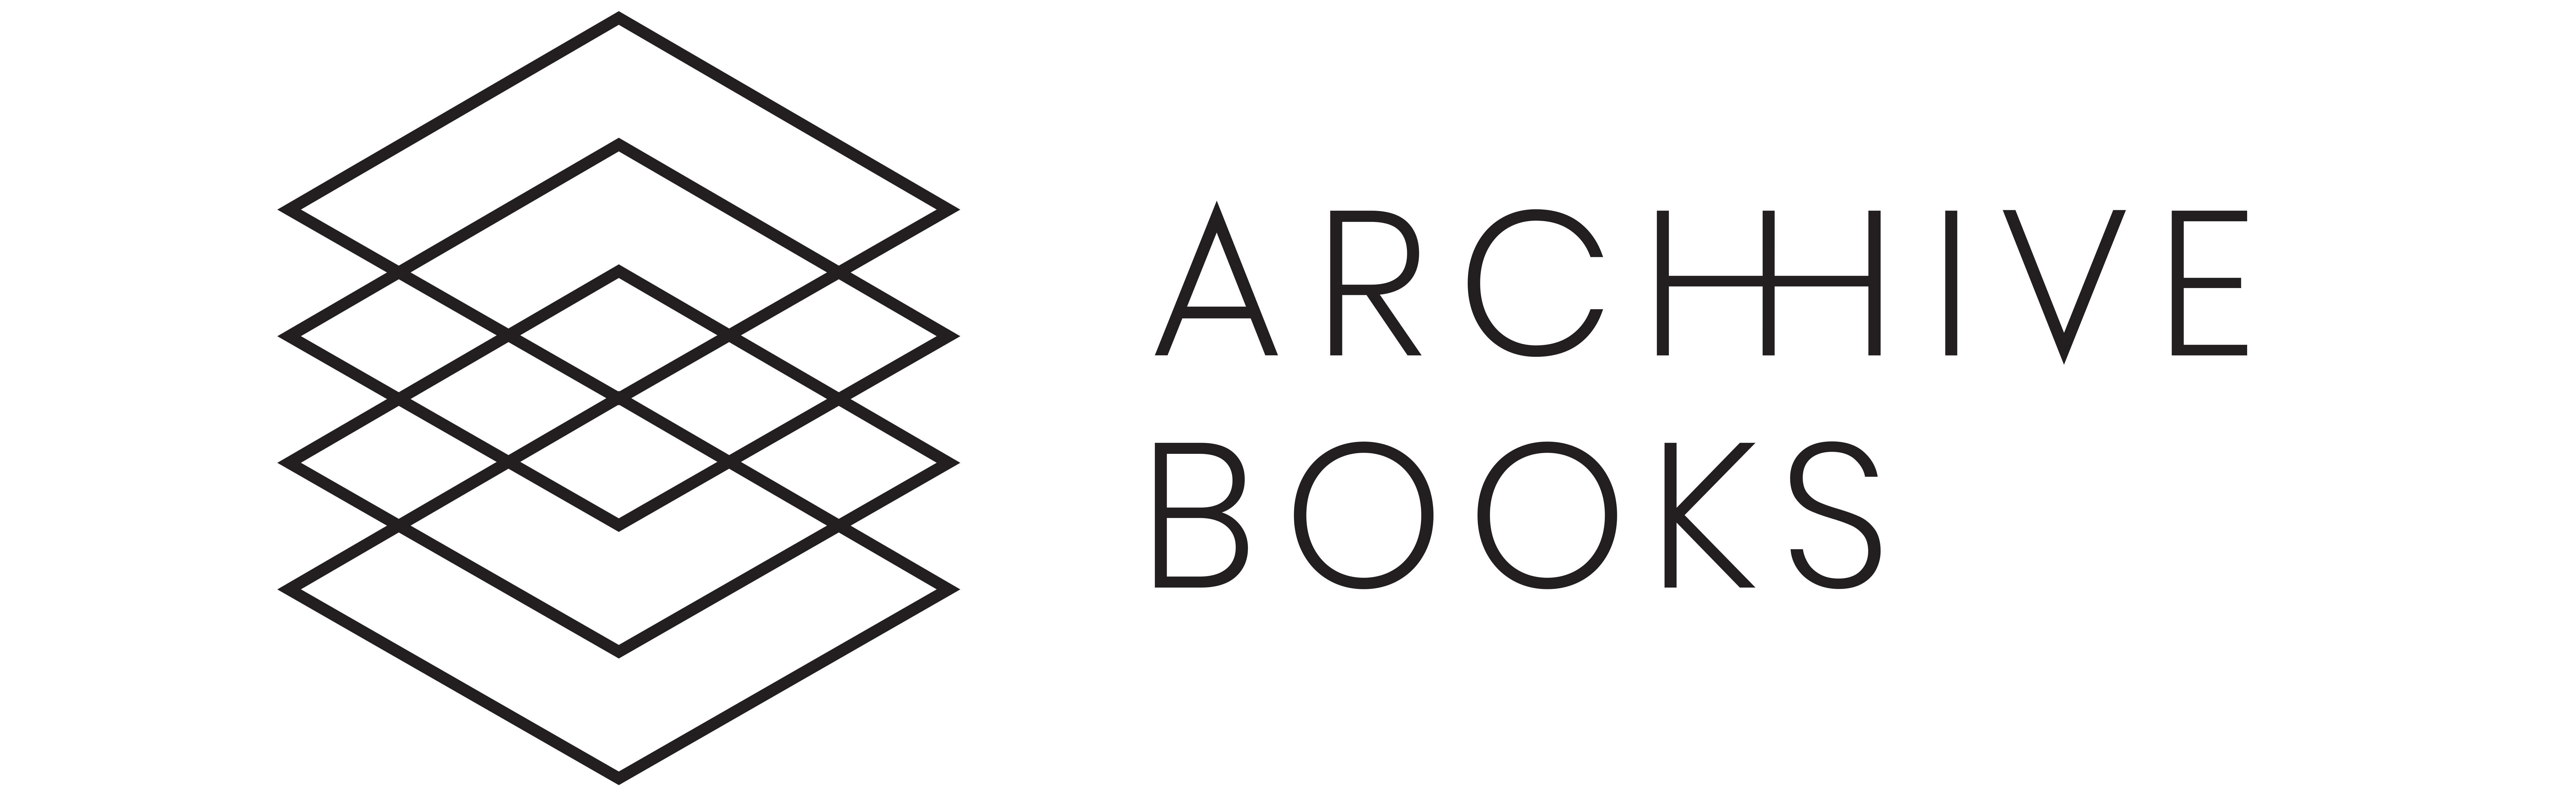 Archhive Books' 
Portable Reading
Rooms